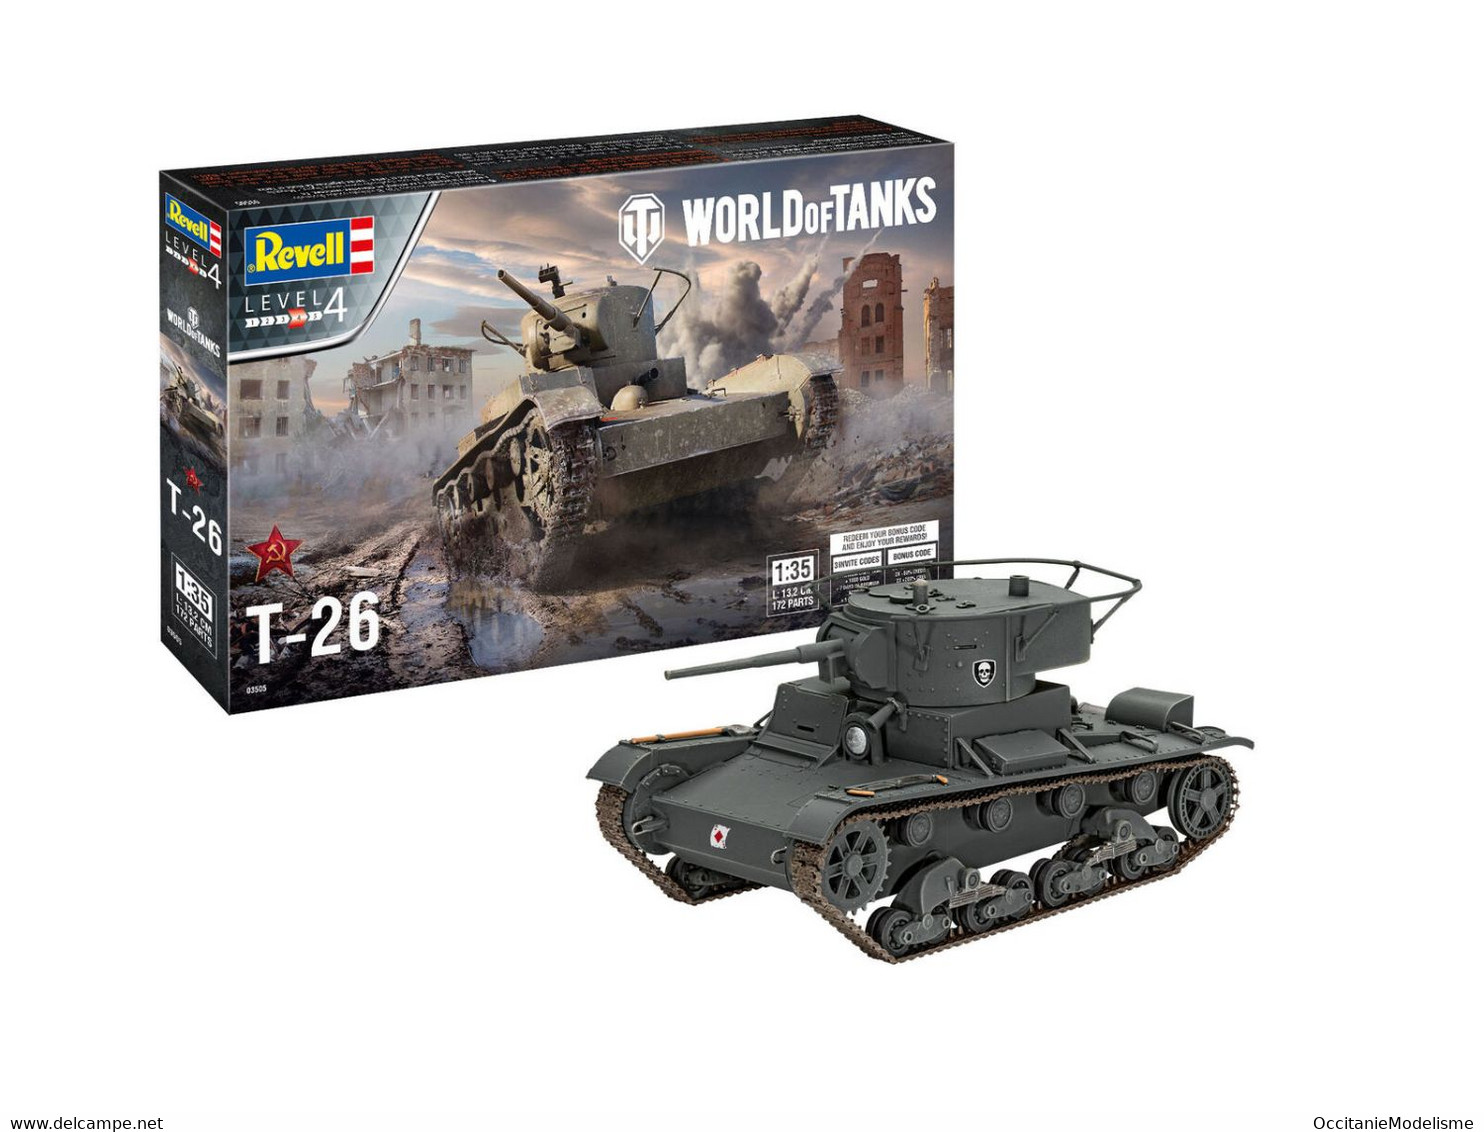 Revell World Of Tanks - Char T-26 WoT Maquette Militaire Kit Plastique Réf. 03505 Neuf 1/35 - Military Vehicles